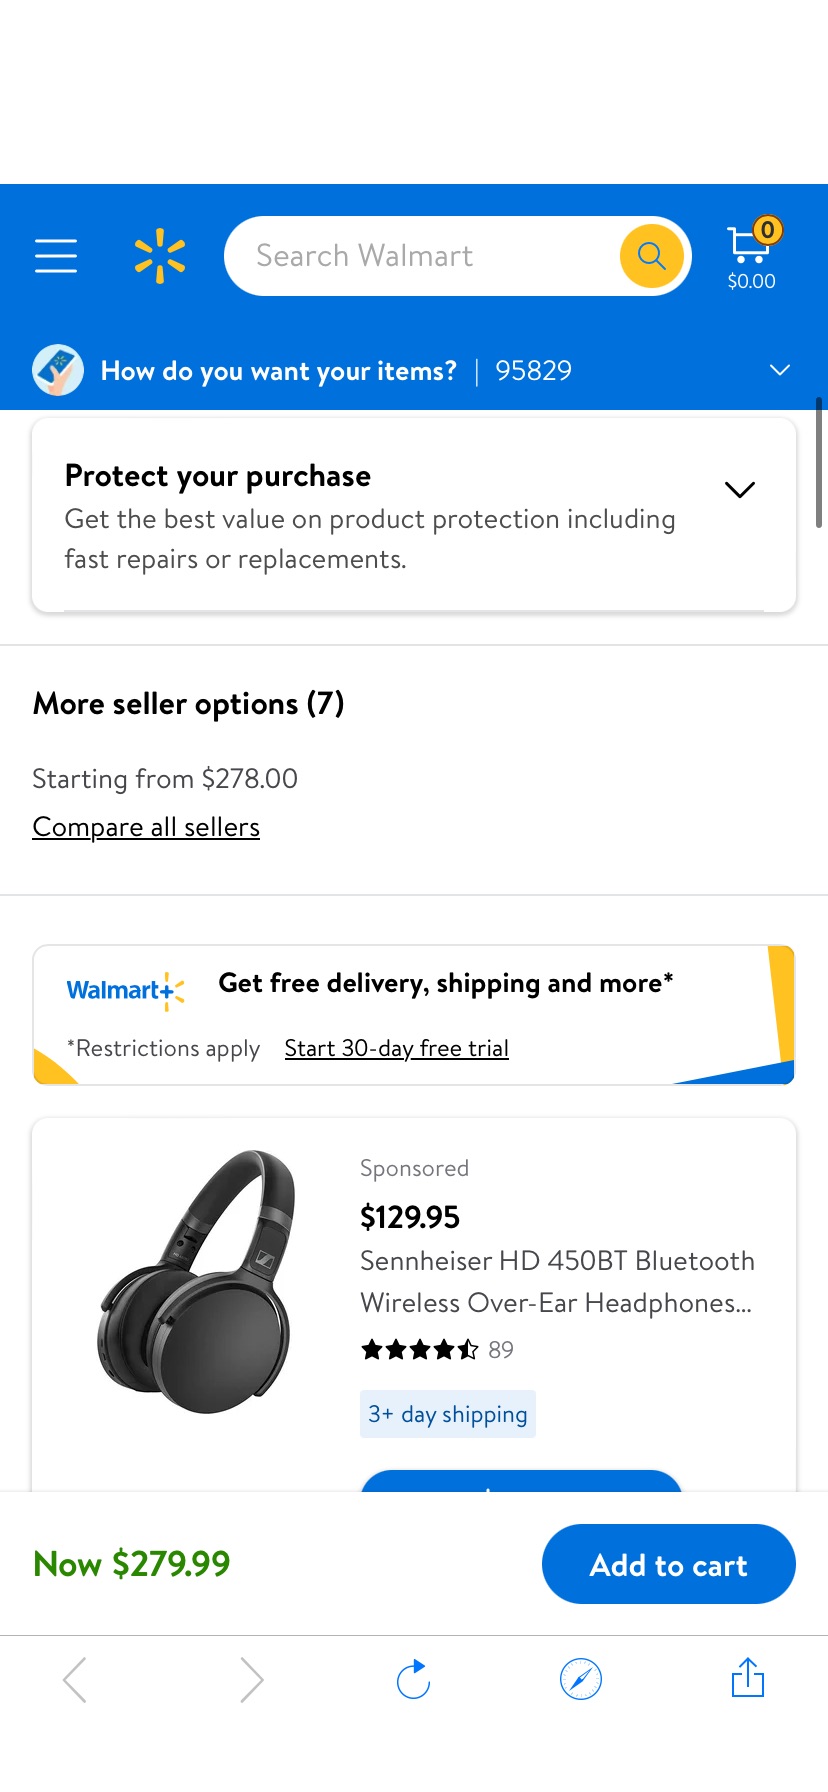 Sony WH-1000XM4 Wireless Noise Canceling Over-the-Ear Headphones with Google Assistant - Black - Walmart.com